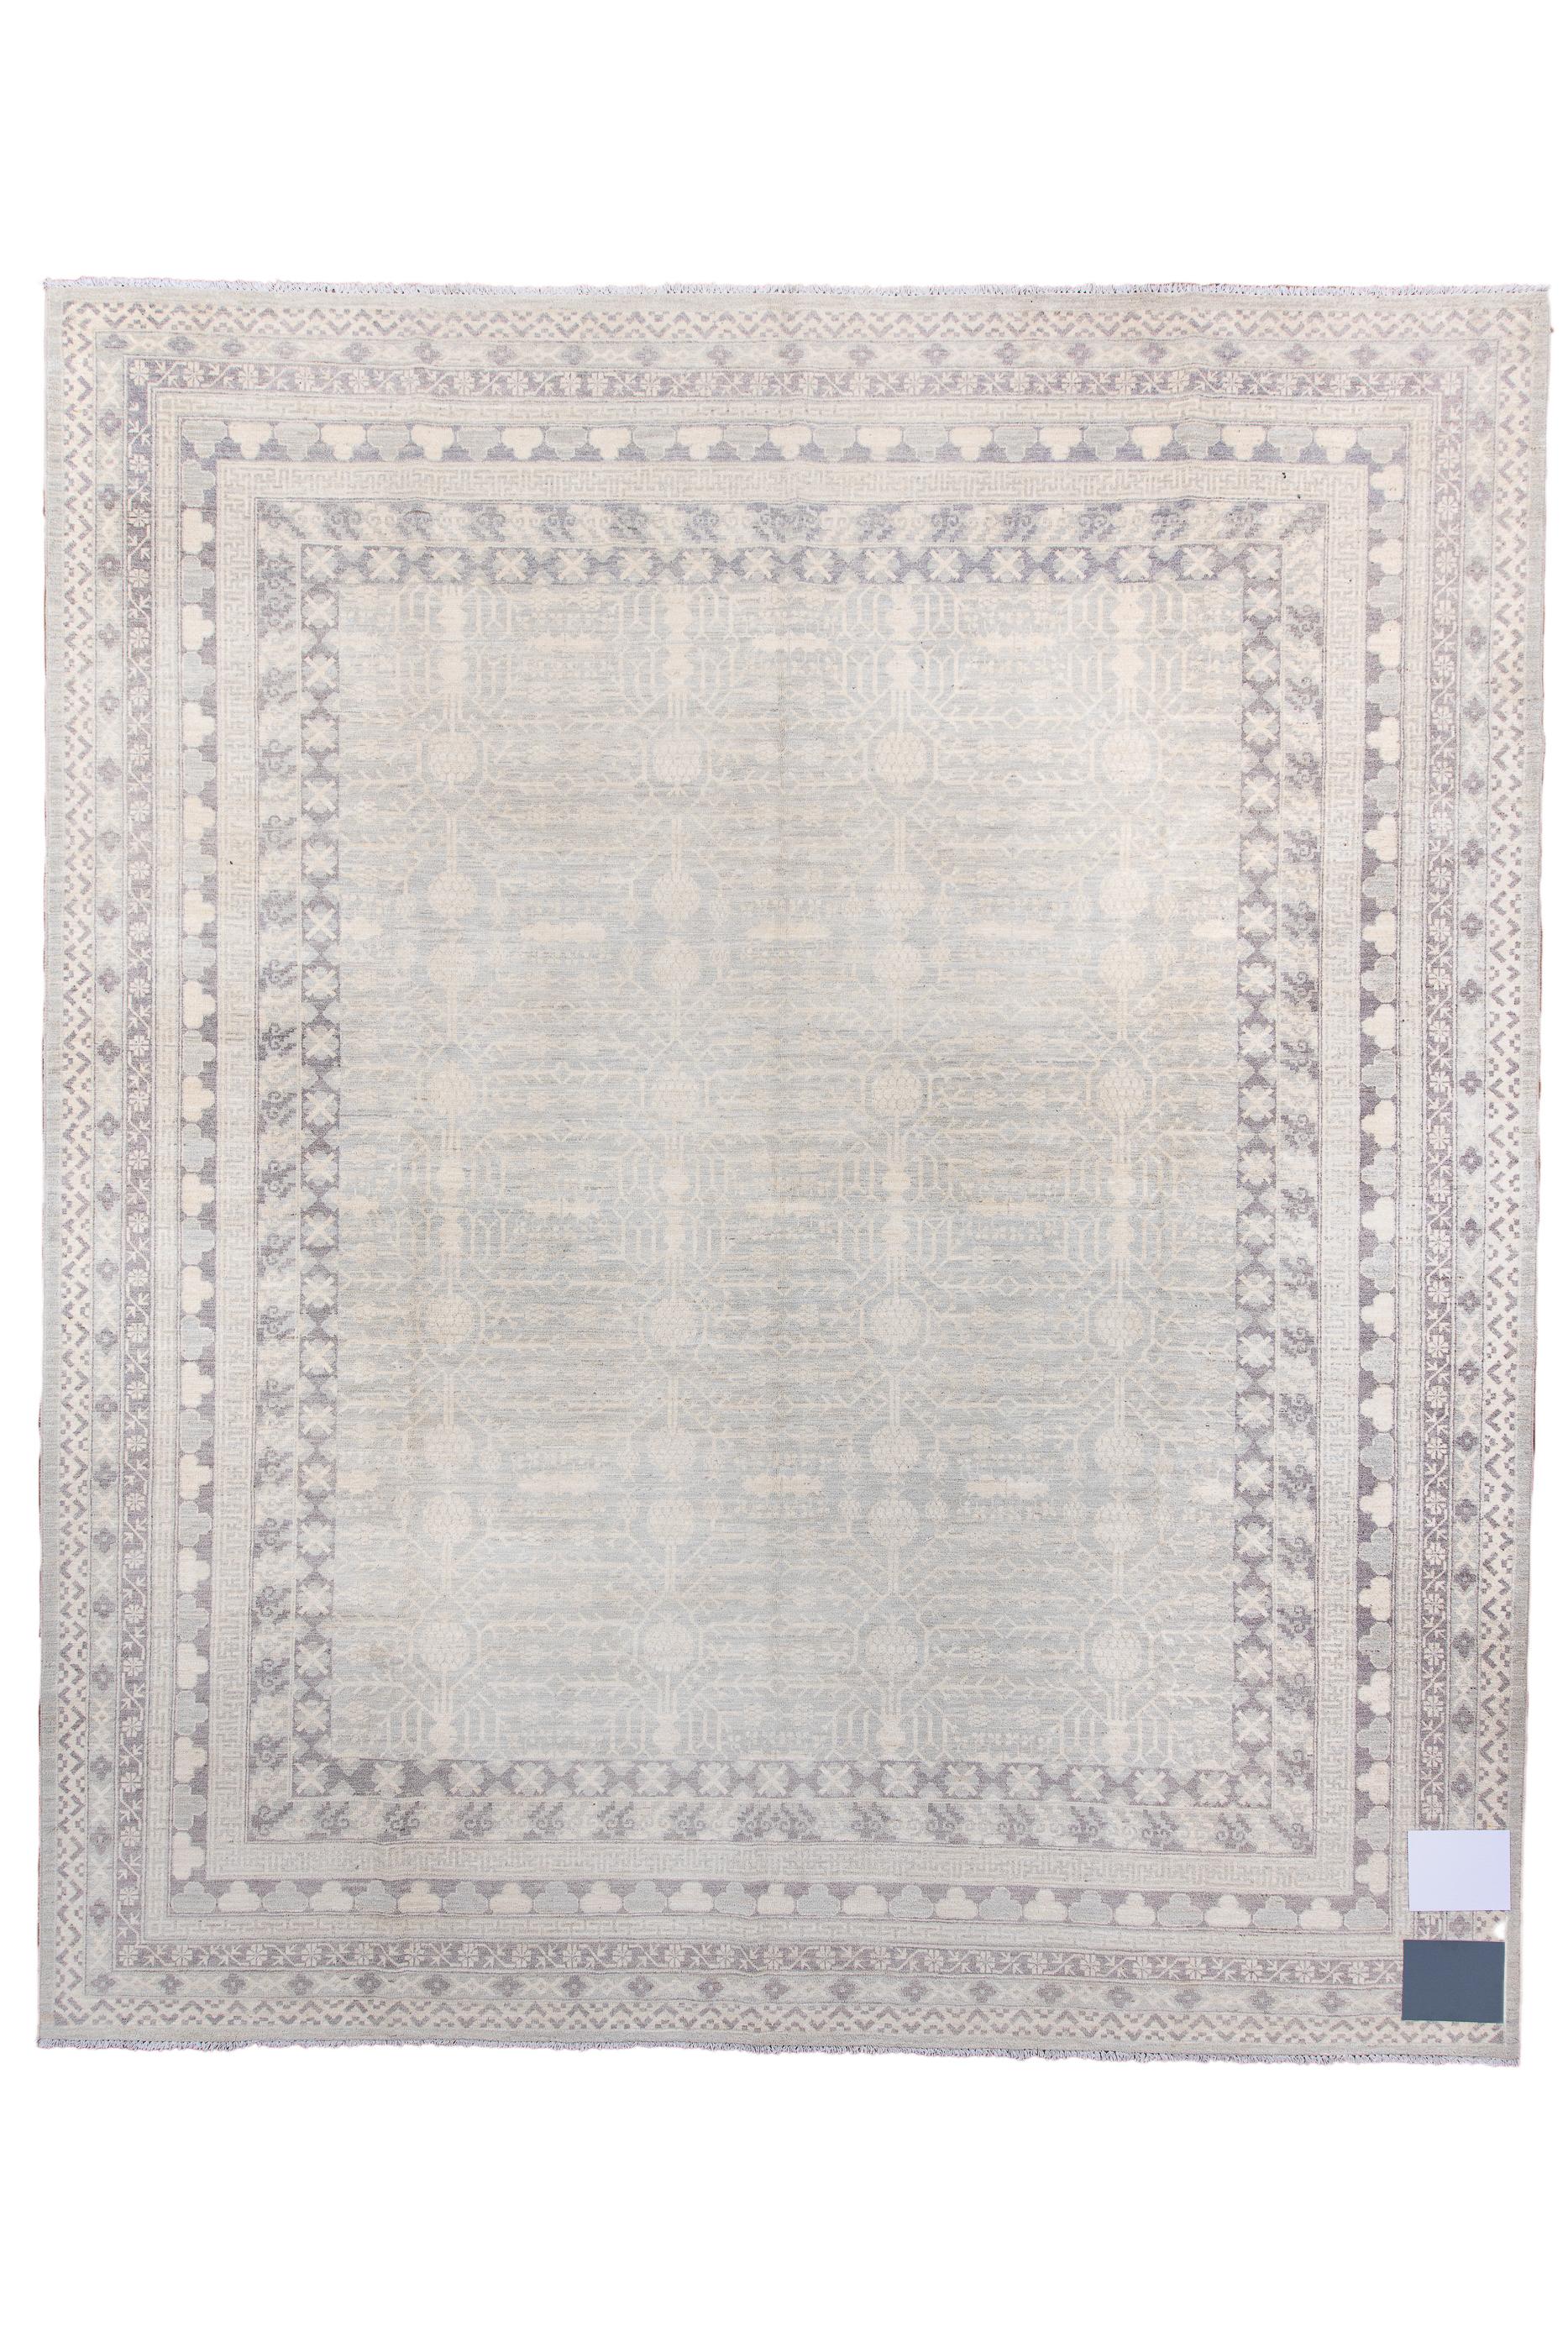 From Western China, this nearly square city carpet features a lightly drawn vase and pomegranate design on a pale straw field.  The nine borders include zig-zags, chains of cartouches with stars, and rows of cloud knots. The tonality is generally